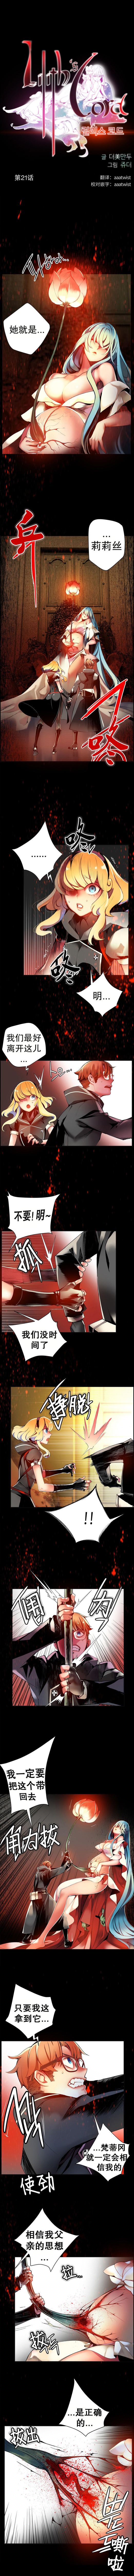 [Juder] 莉莉丝的脐带(Lilith`s Cord) Ch.1-29 [Chinese] 383